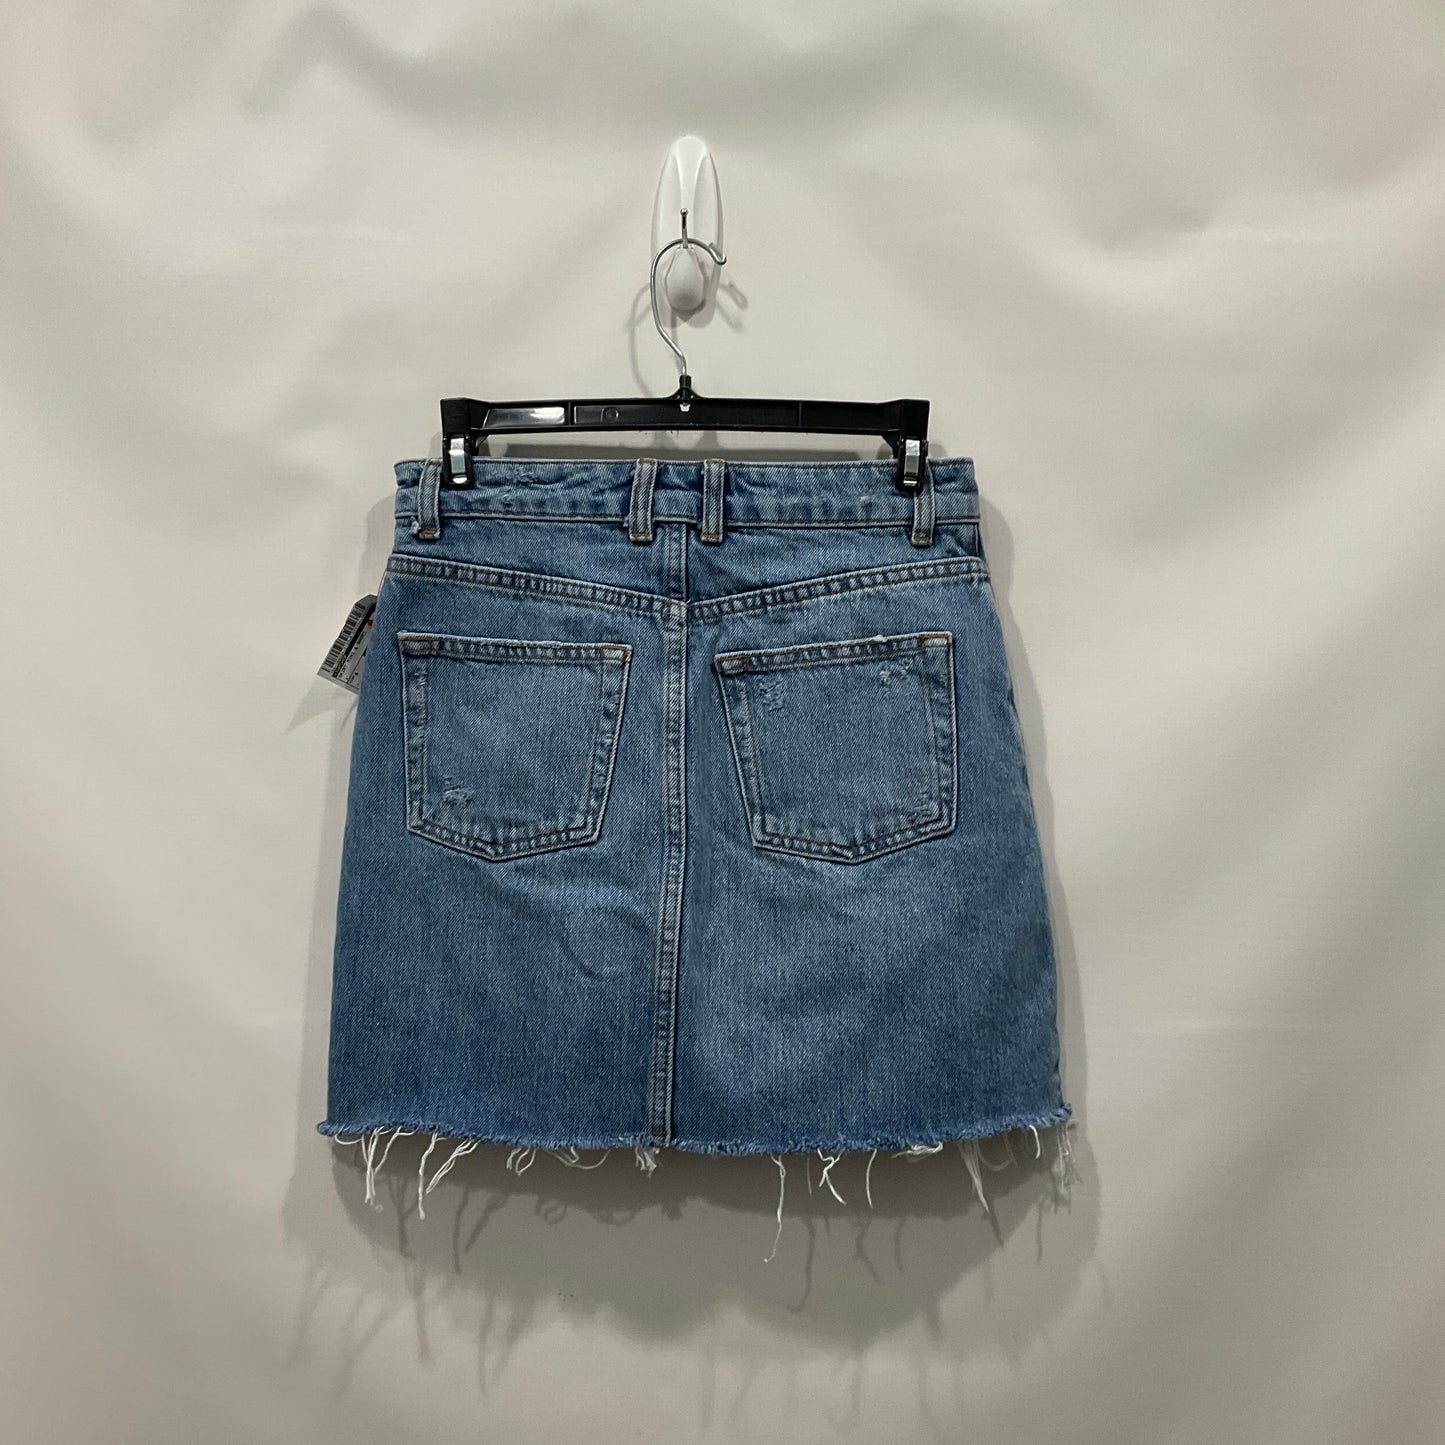 Skirt Mini & Short By Topshop  Size: 4